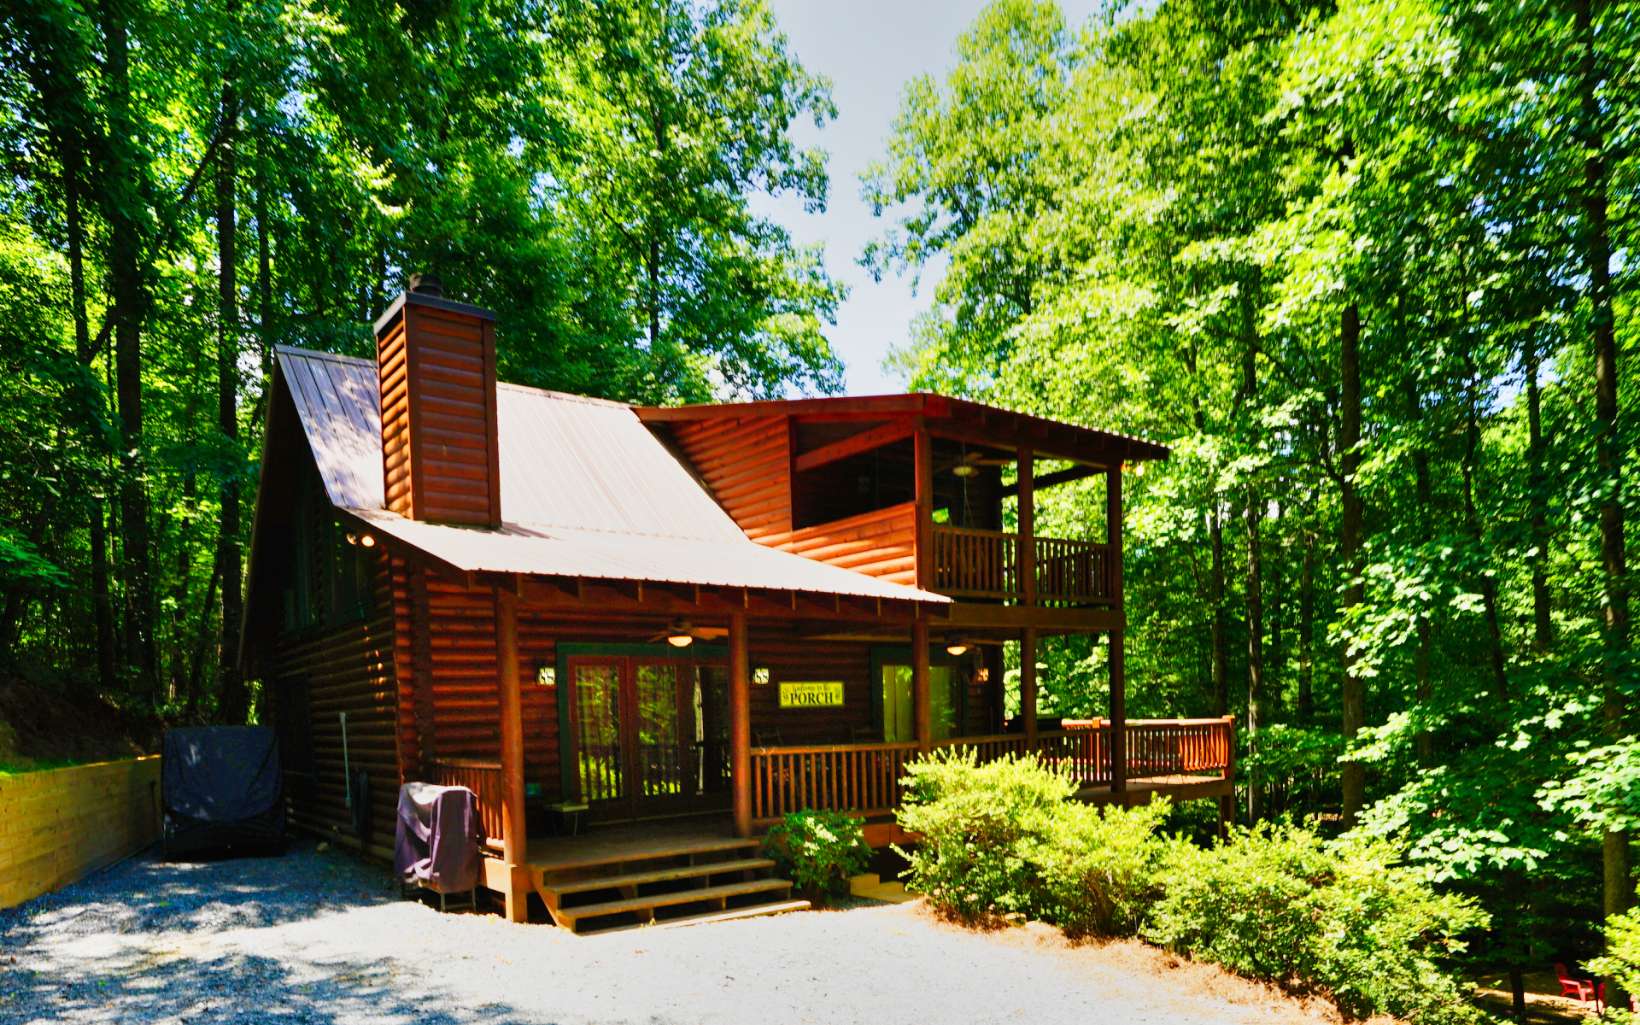 300+ Feet Vandergriff Creek Frontage, Private and No Restrictions. Completely Furnished, Real Log Cabin, with extended deck that overlooks Noisy Vandergriff Creek. This home has an additional 2 acres across the creek making some of the creek frontage owned on both sides ( see plat attached for better description) Along with a new added 1.25 acres. Total 5.24 acres. Roomy Main floor and Upper Bedrooms have French doors leading to a decks, loft is big enough for bunk beds. The Creek front and private setting creates a peaceful place to relax, sit in the Hot Tub, play in the creek, and get away! Completely furnished and Move in Ready this could be considered as an excellent rental potential for STR. The roads are wide and only about 3 miles of hard packed gravel (nothing is Rough or Steep). Must have appointment, Gated at driveway. New retaining Wall, Turn around in drive, New gravel, New stairs down to Firepit and Creek. New 60 Gallon Hot water Heater, New Water Softner filter and sediment filter installed early June 2022. Newer Deck extension, Newer Generator it was serviced in May 2022. A nice relaxing firepit at the creek level for peace and serenity.